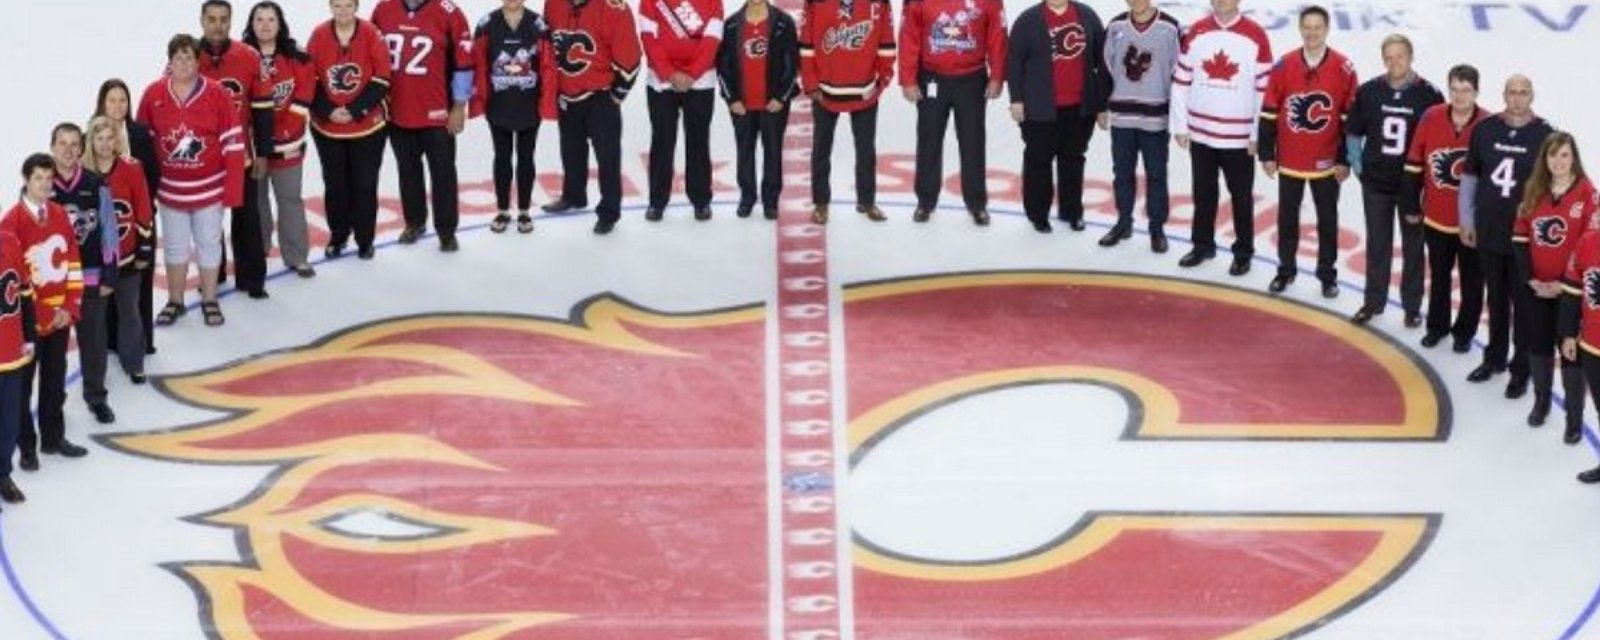 Flames' fans step up and put the Flames ownership to shame.